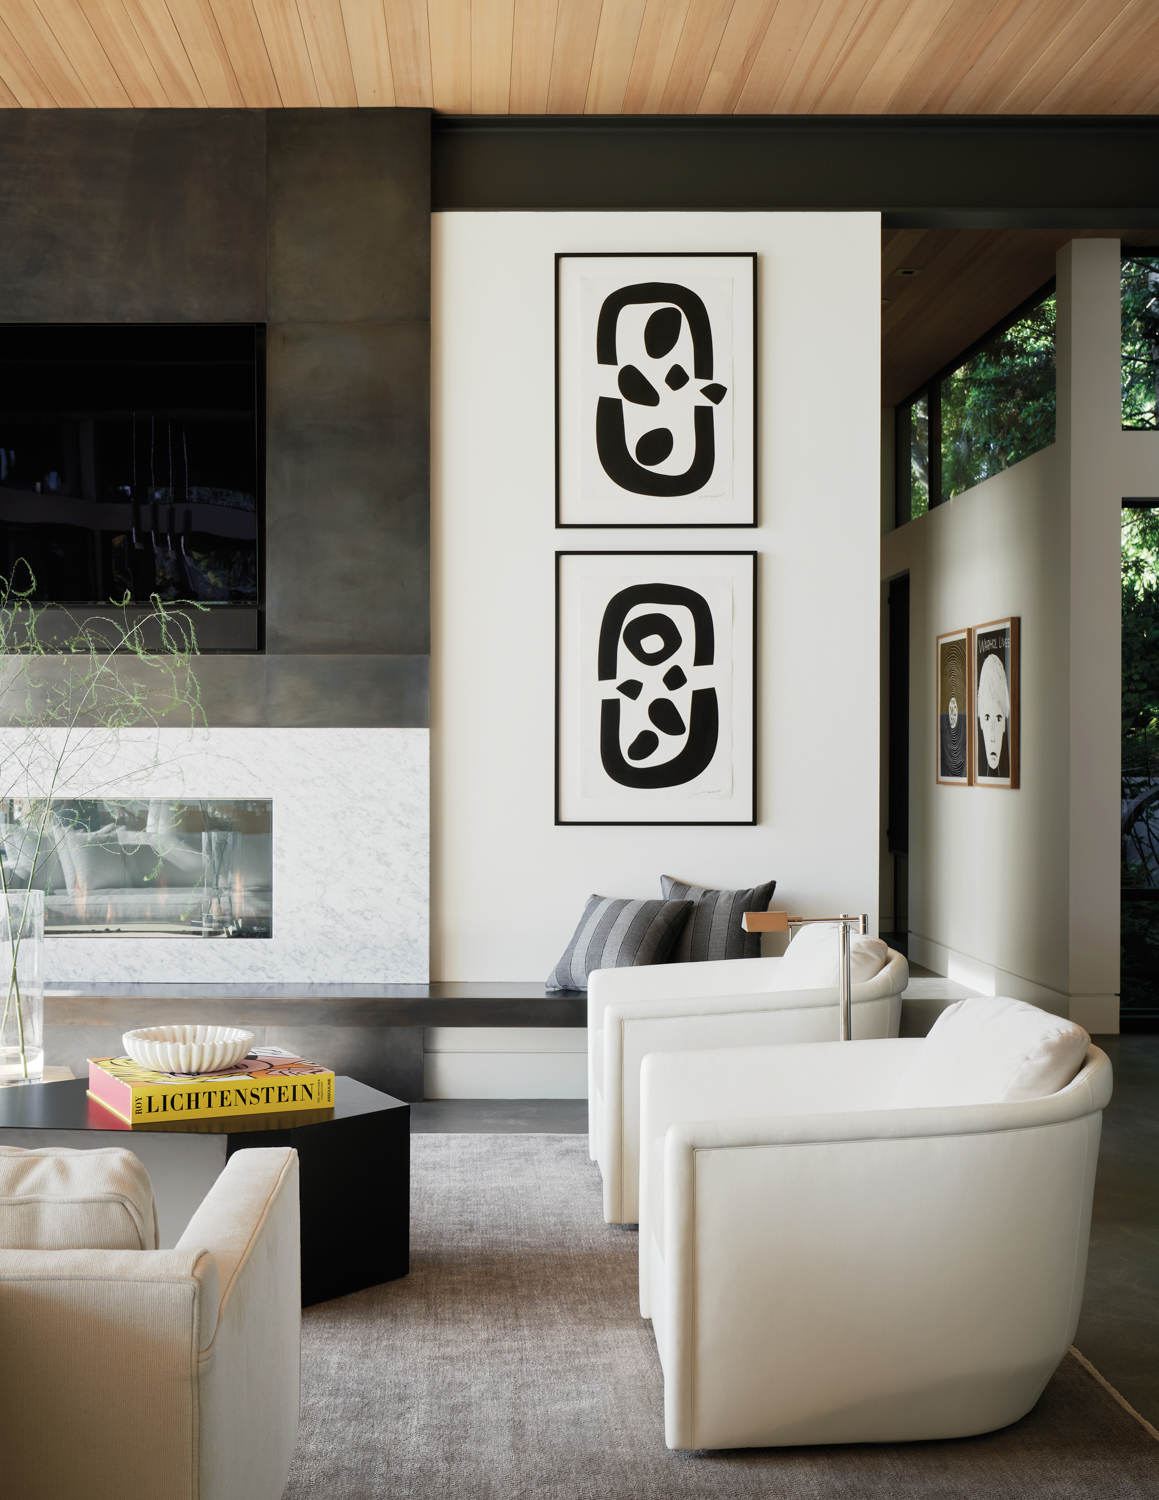 Living room with white armchairs facing black coffee table in front of modern artwork and fireplace